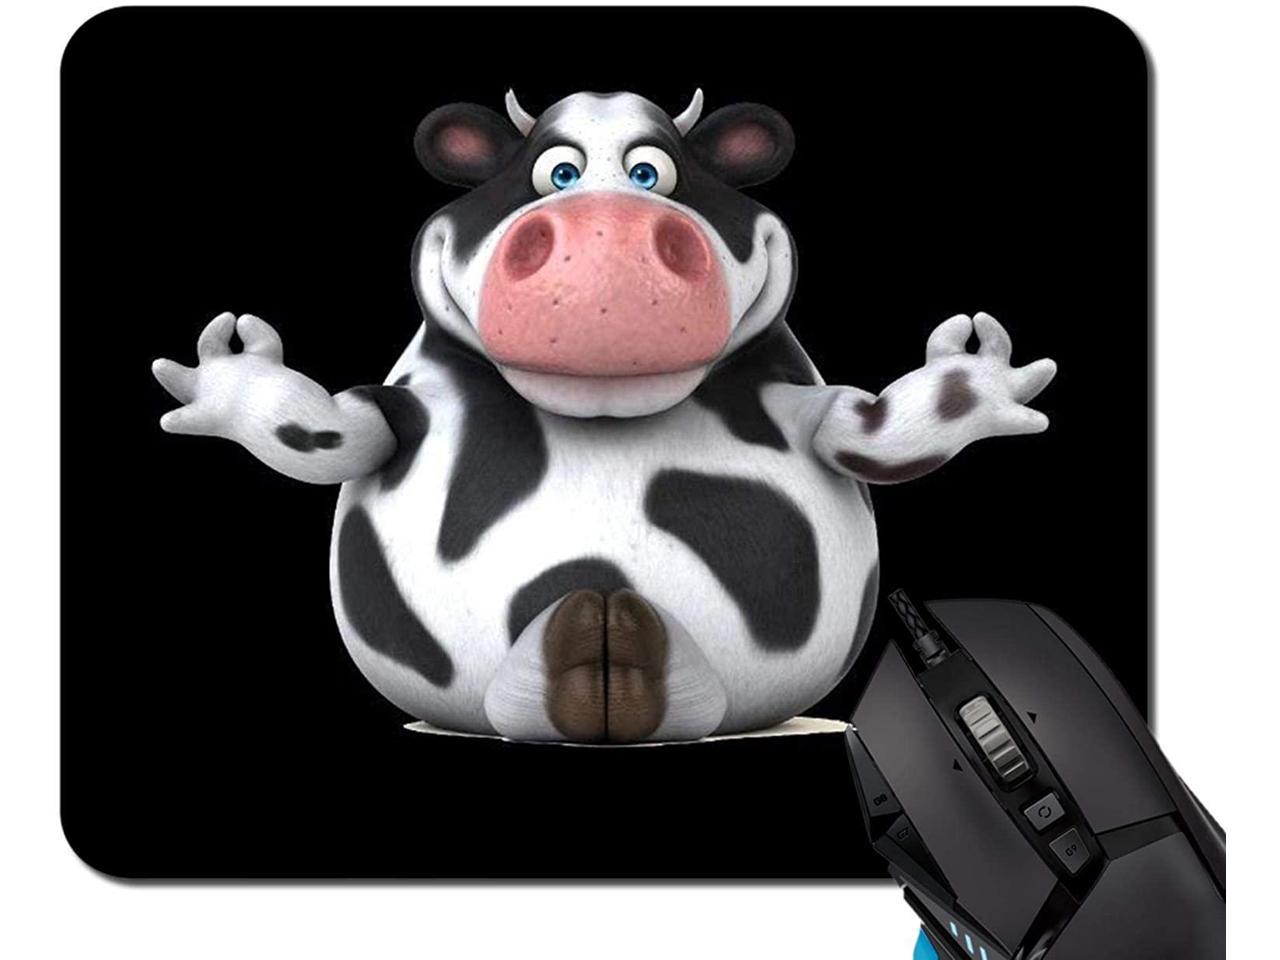 Cow Wrist Computer Mouse Pad/ Cute Animal Cow Non-slip Memory Foam/ Comfort/ Wrist Support Mouse Pad/ Mouse Pad Desk Accessories